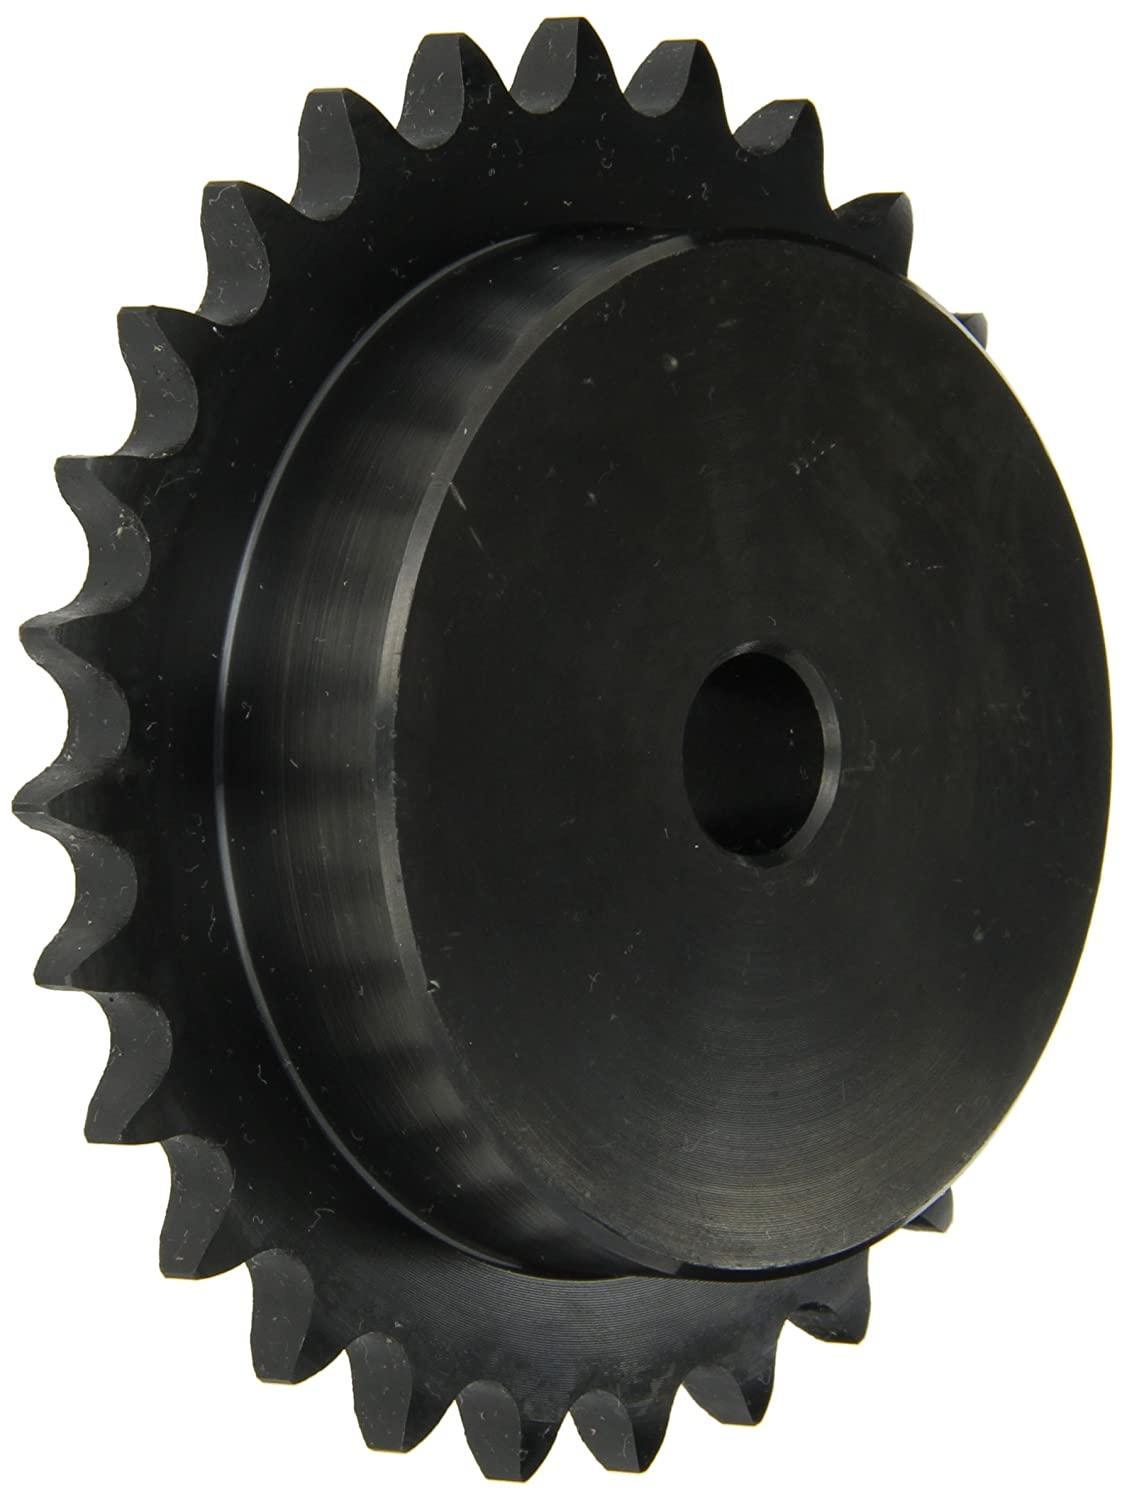 100B39 Roller Chain Sprocket With Stock Bore - Forces Inc